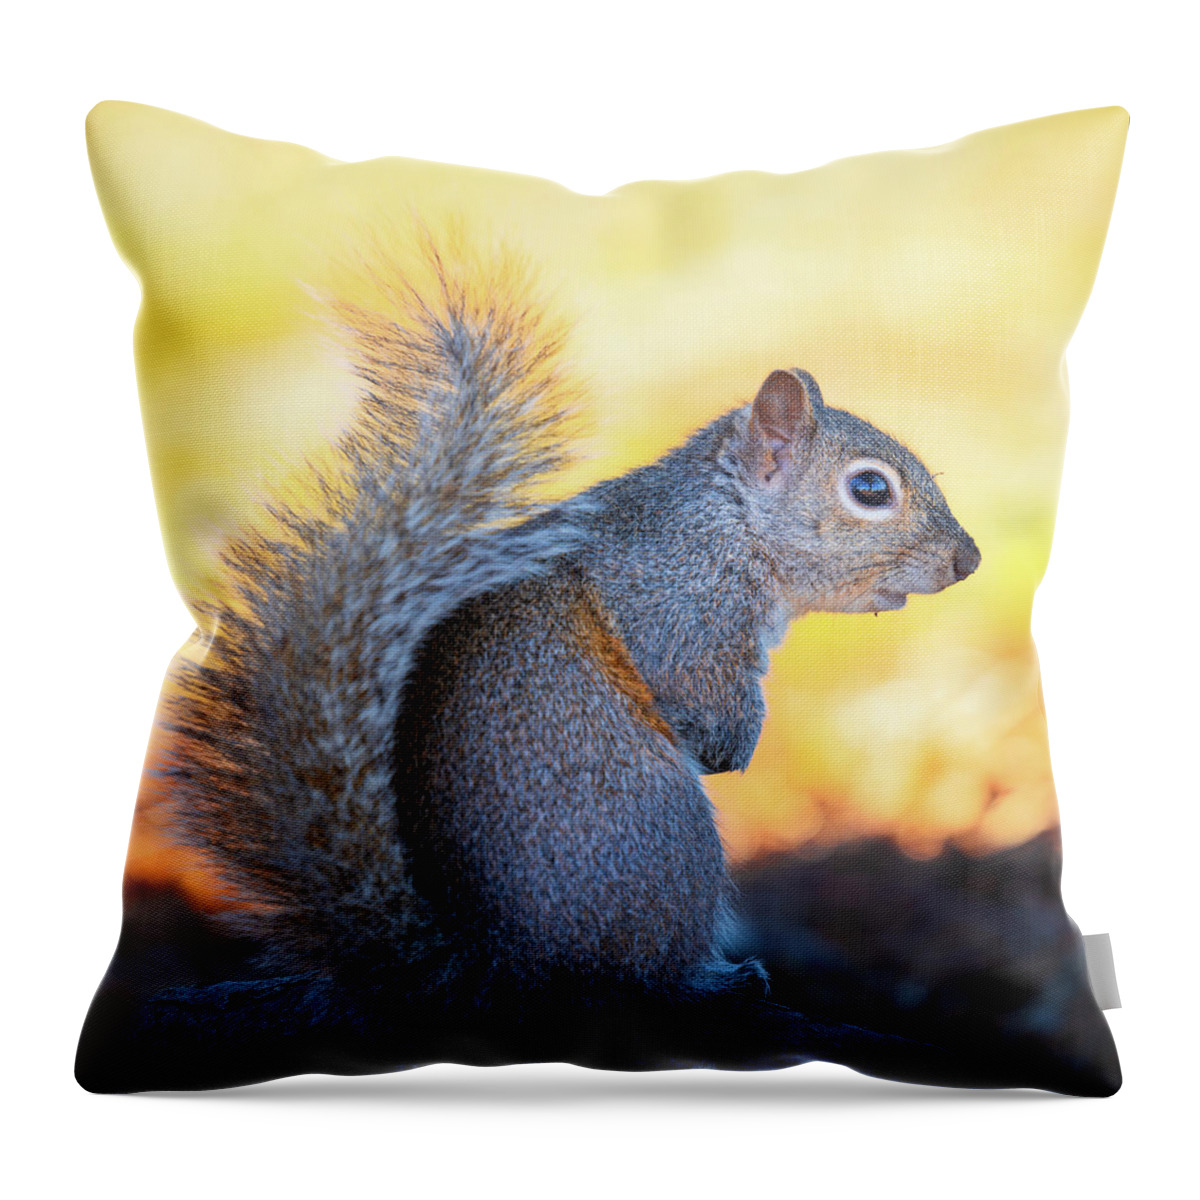 Grey Squirrel Throw Pillow featuring the photograph Eastern Gray Squirrel Portrait by Jordan Hill